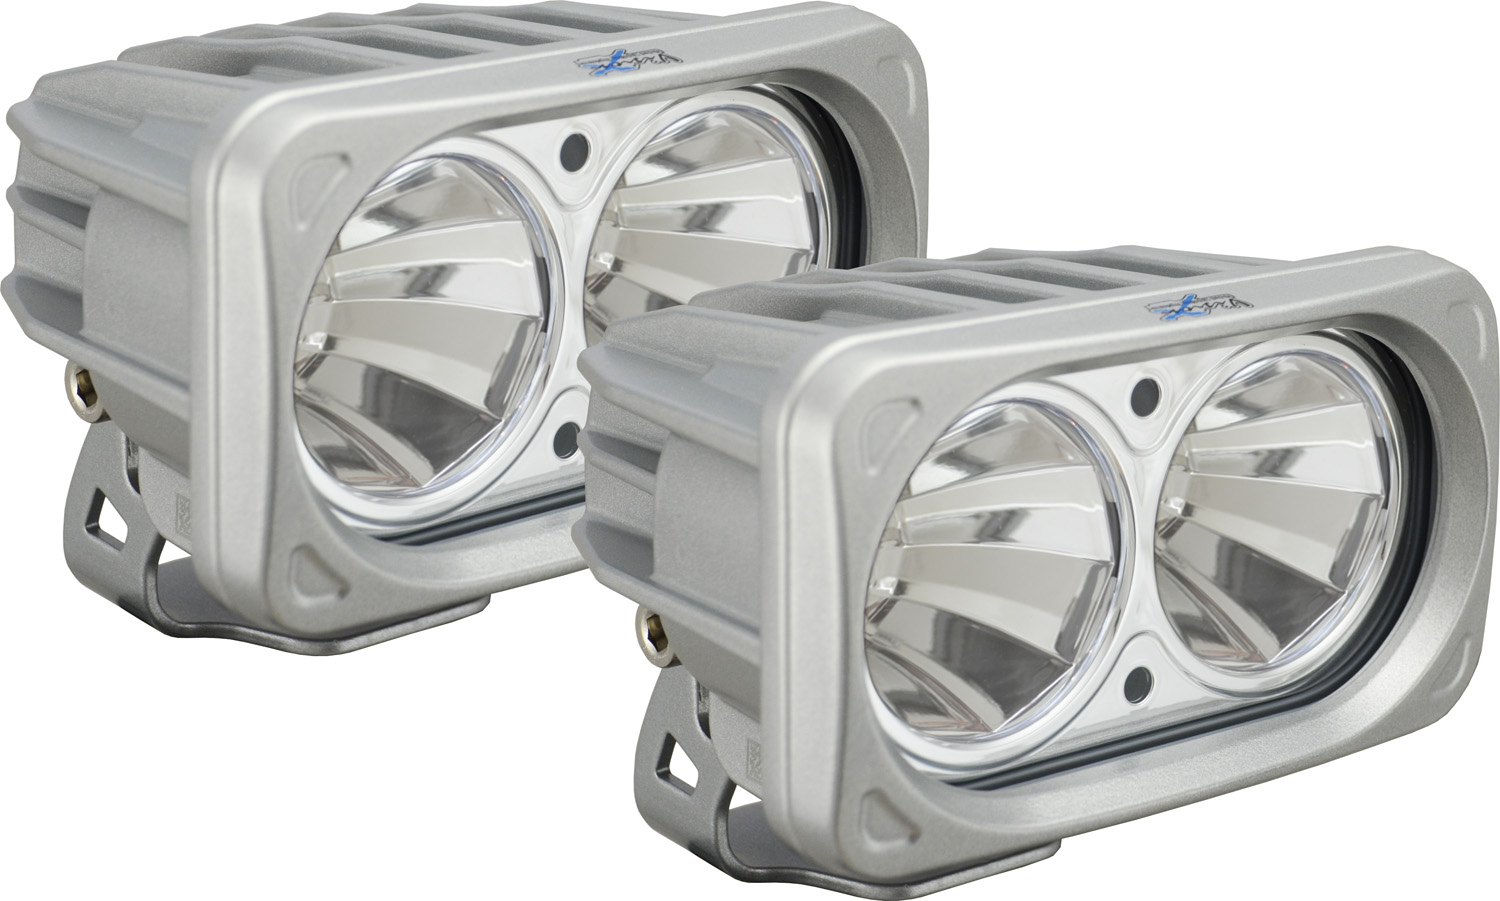 OPTIMUS SQUARE SILVER 2 10W LEDS 60? FLOOD KIT OF 2 LIGHTS - Click Image to Close